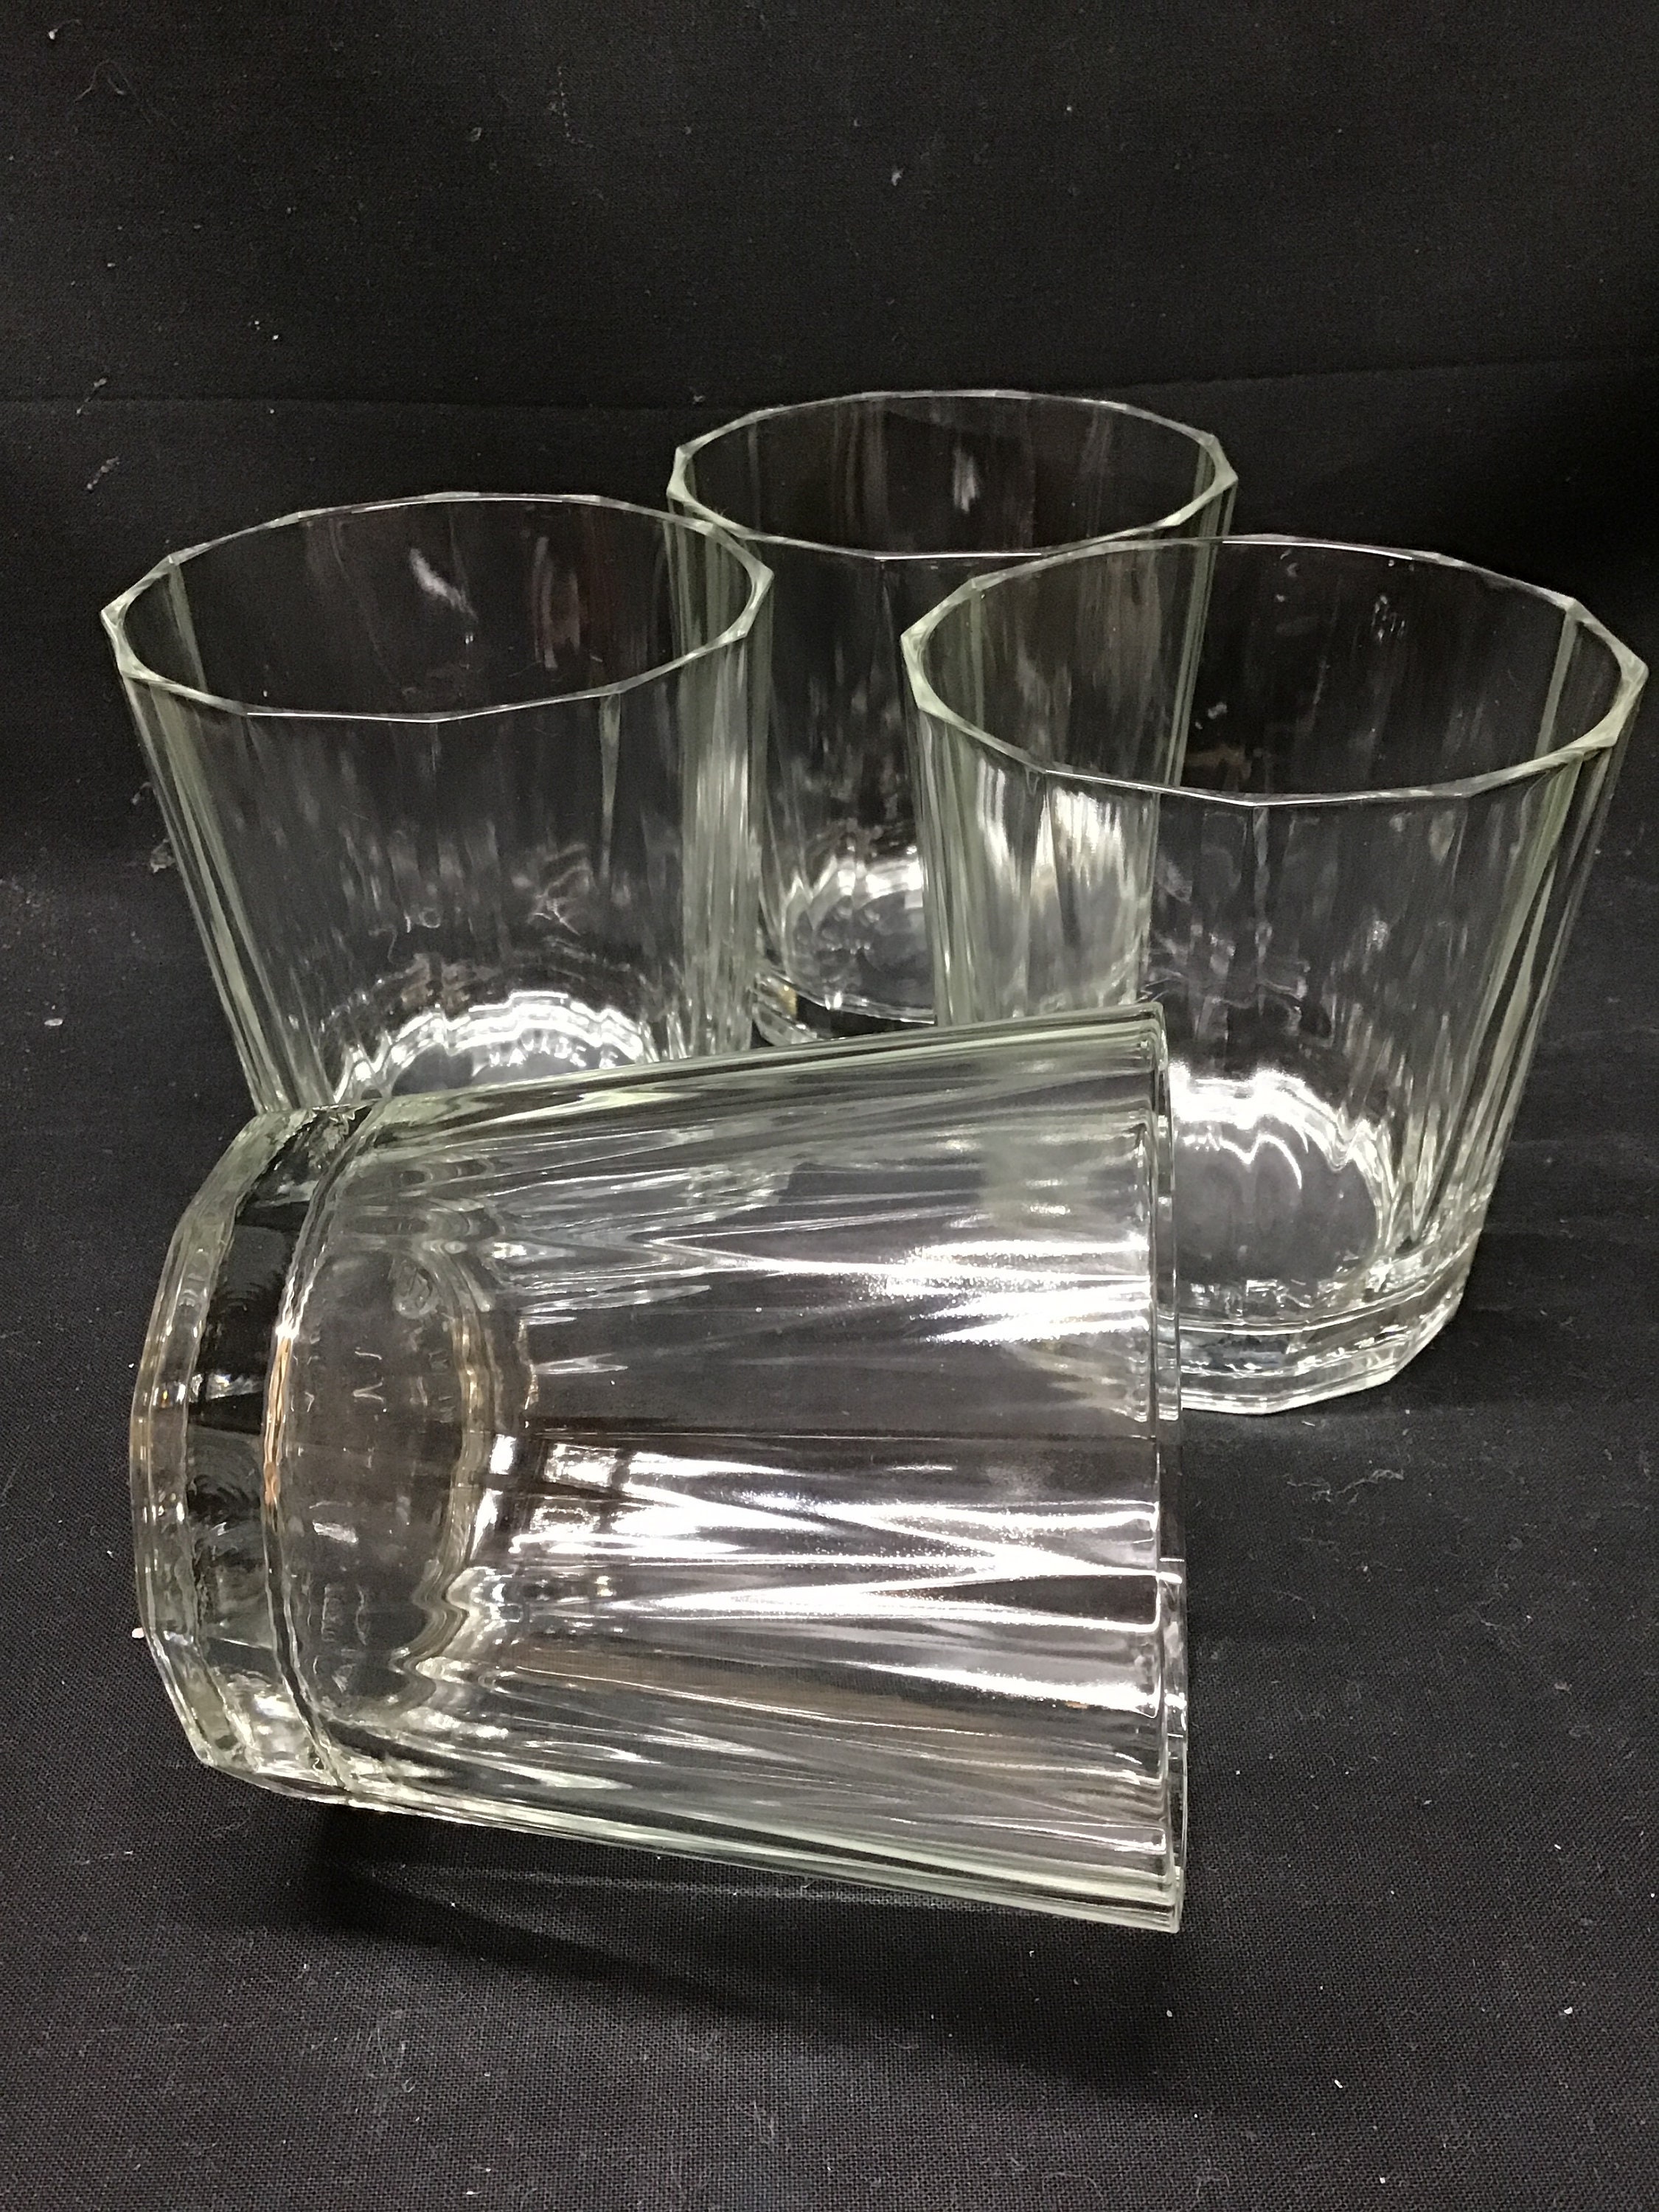 ZMOWIPDL Ribbed Glassware Vintage Drinking Glasses with Straws Set of  6,Clear Fluted Ripple Glass Cu…See more ZMOWIPDL Ribbed Glassware Vintage